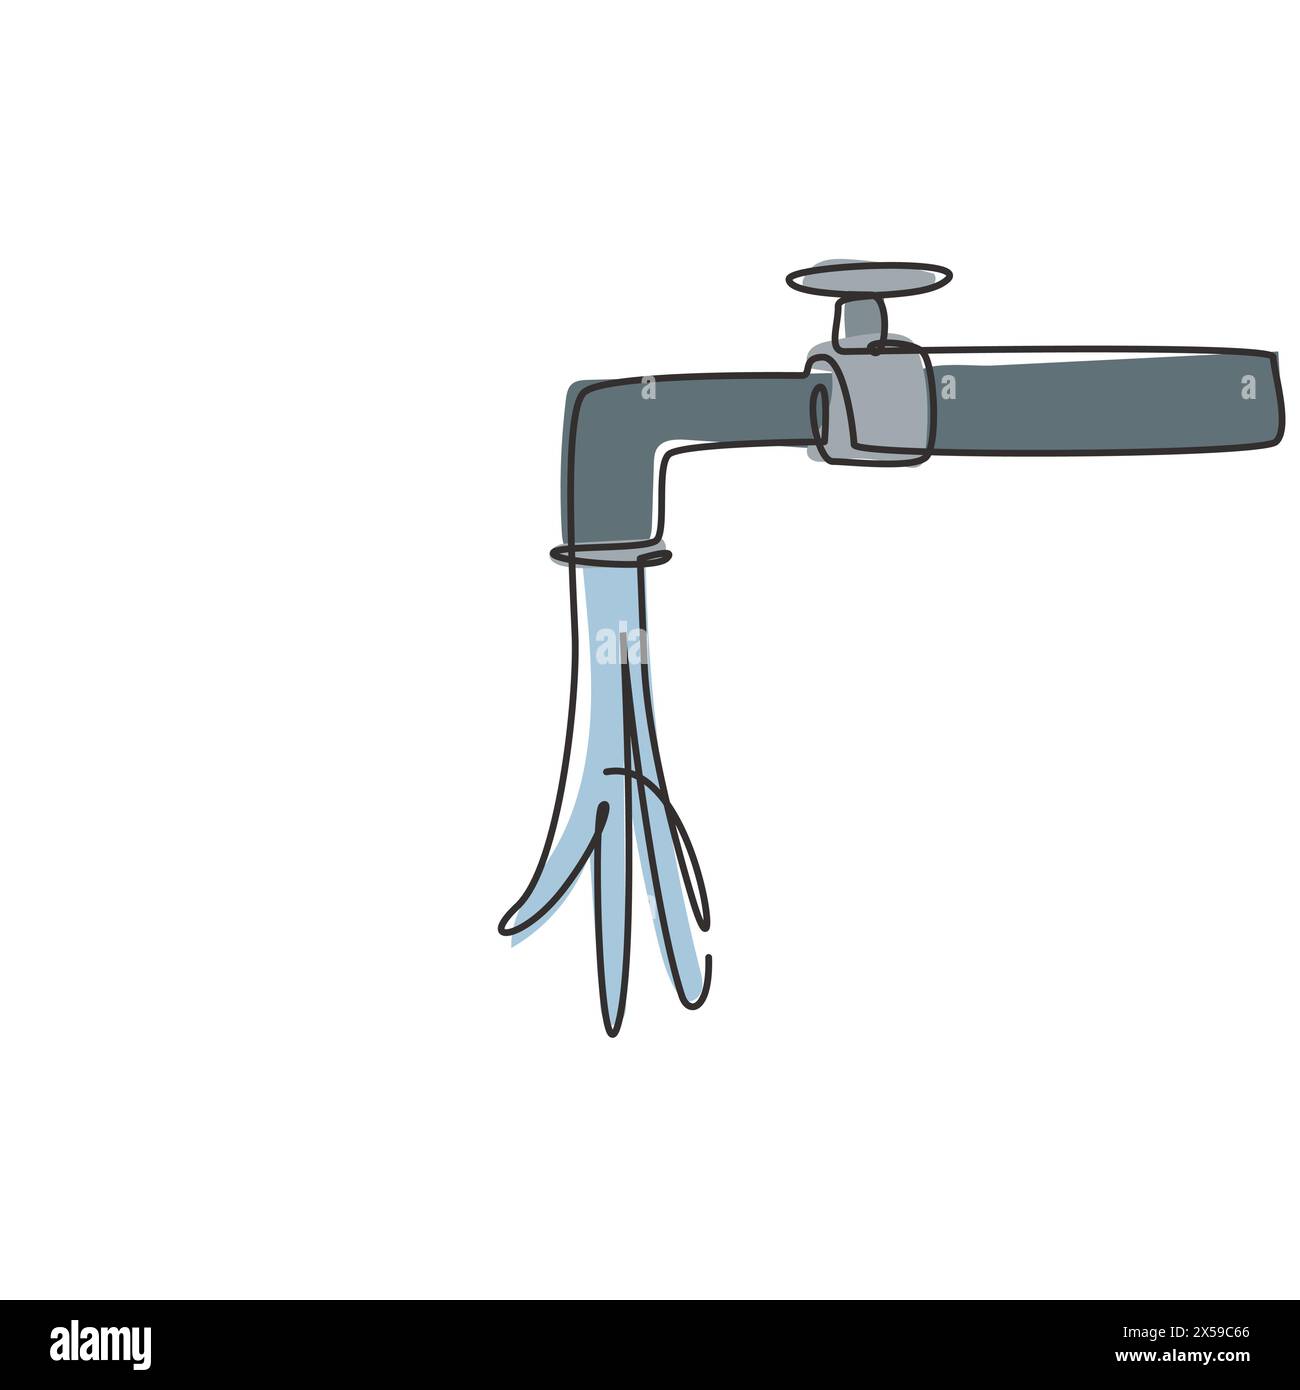 Single one line drawing of a splash of water falling from the water tap. Symbol of freshness and cleanliness of hands from germs and bacteria. Continu Stock Vector